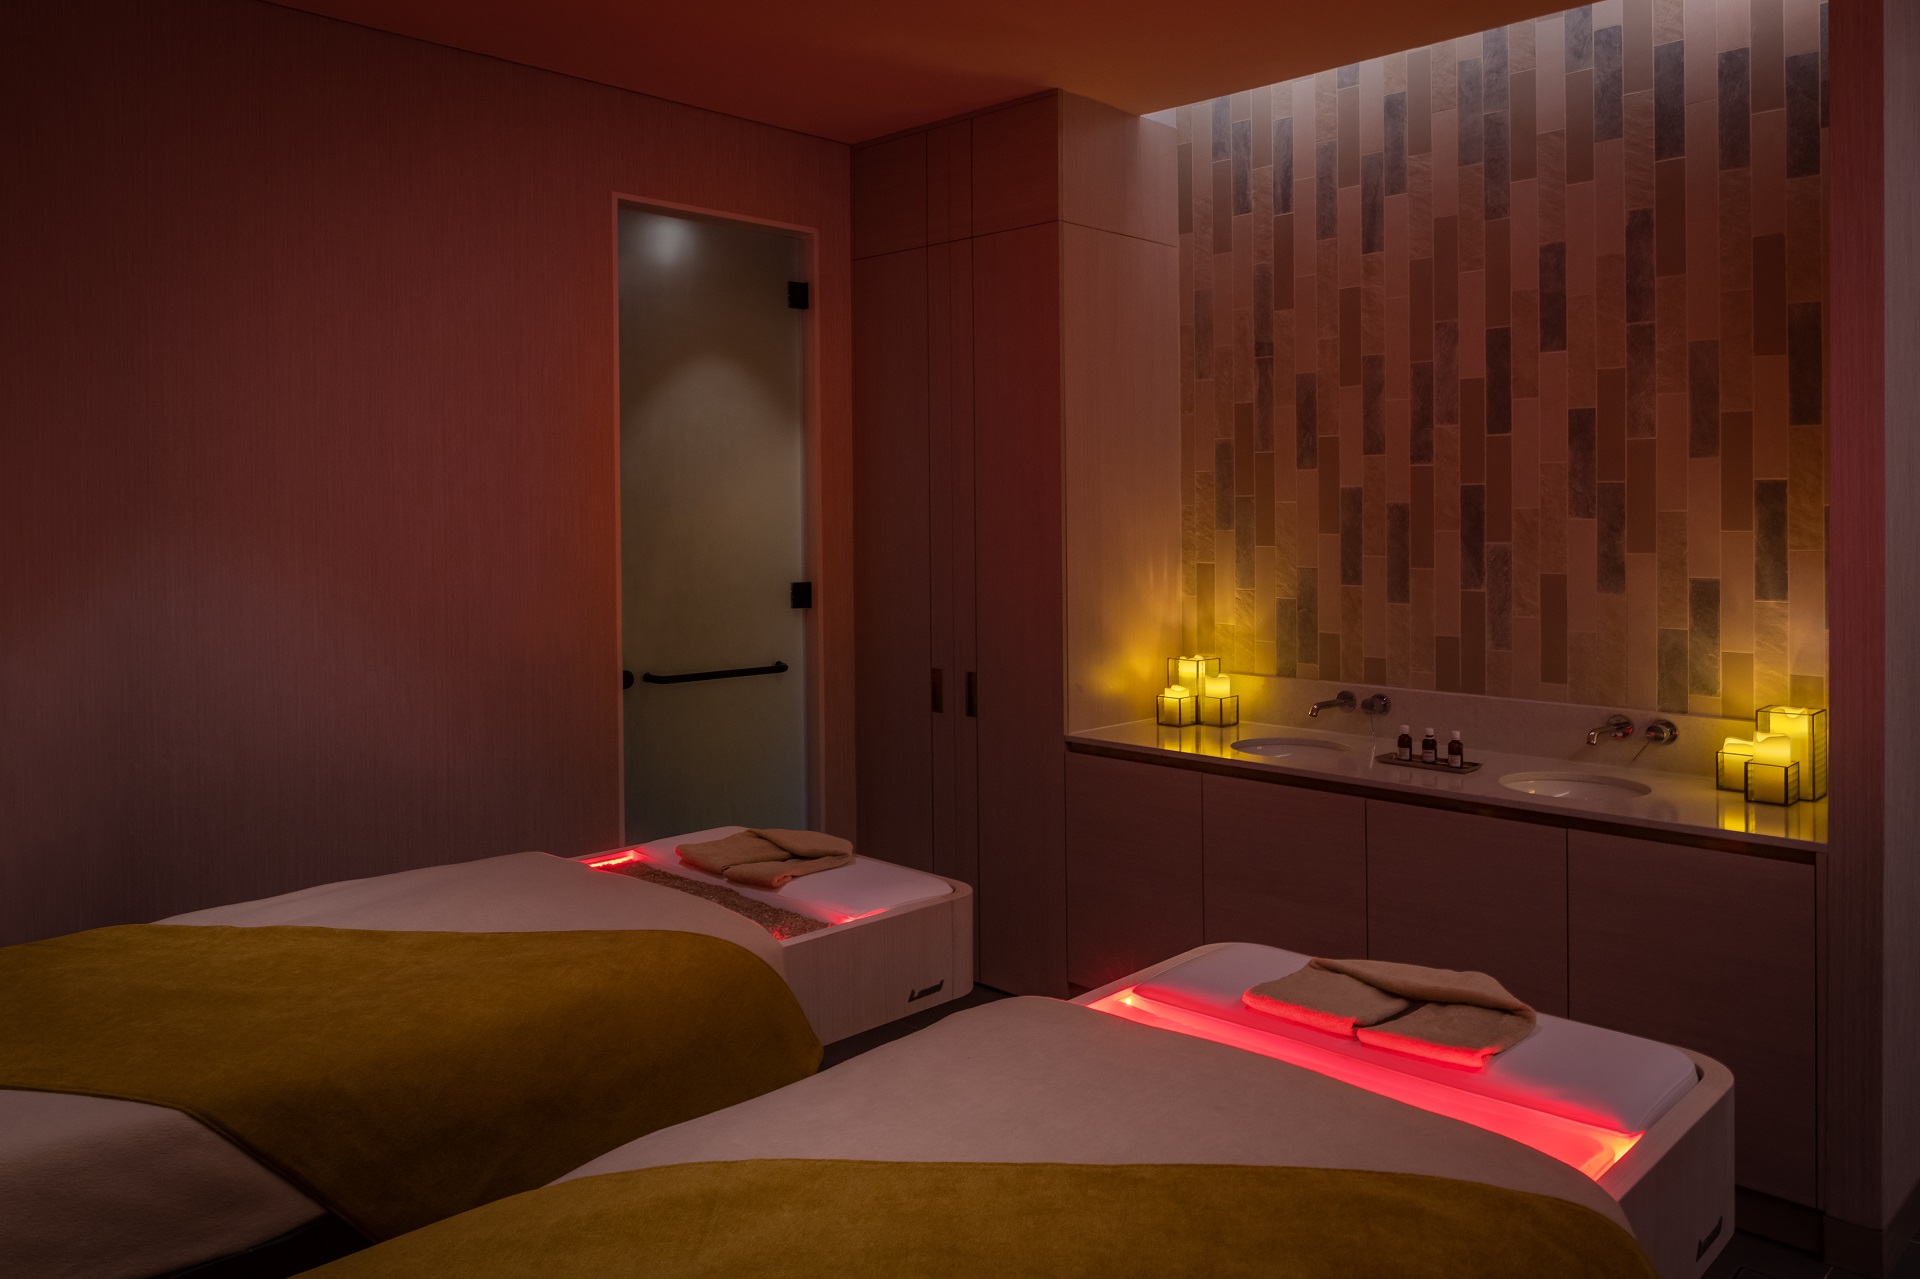 Spa - couples treatment room